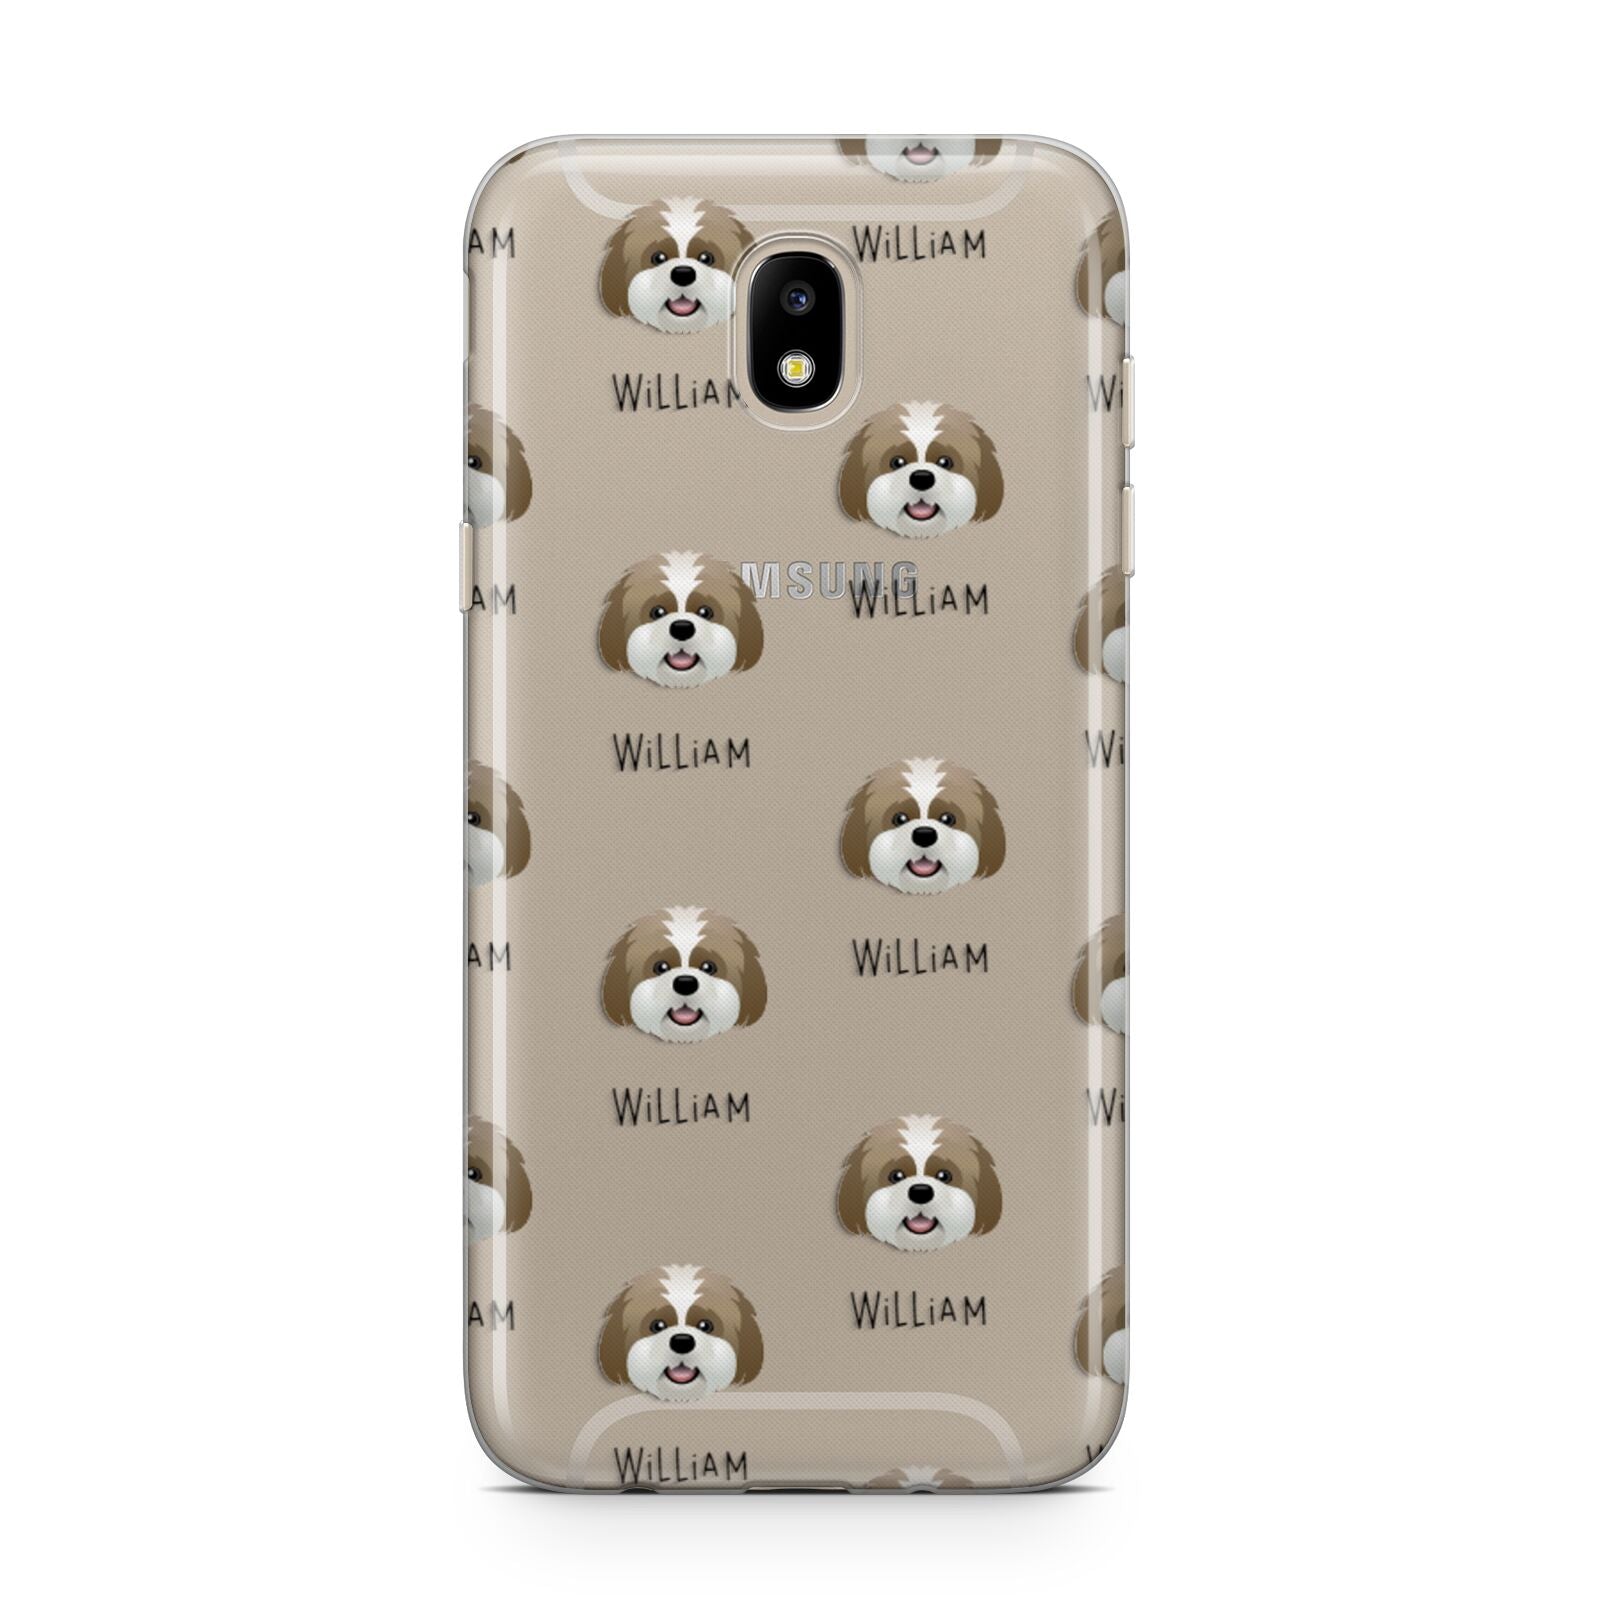 Lhatese Icon with Name Samsung J5 2017 Case